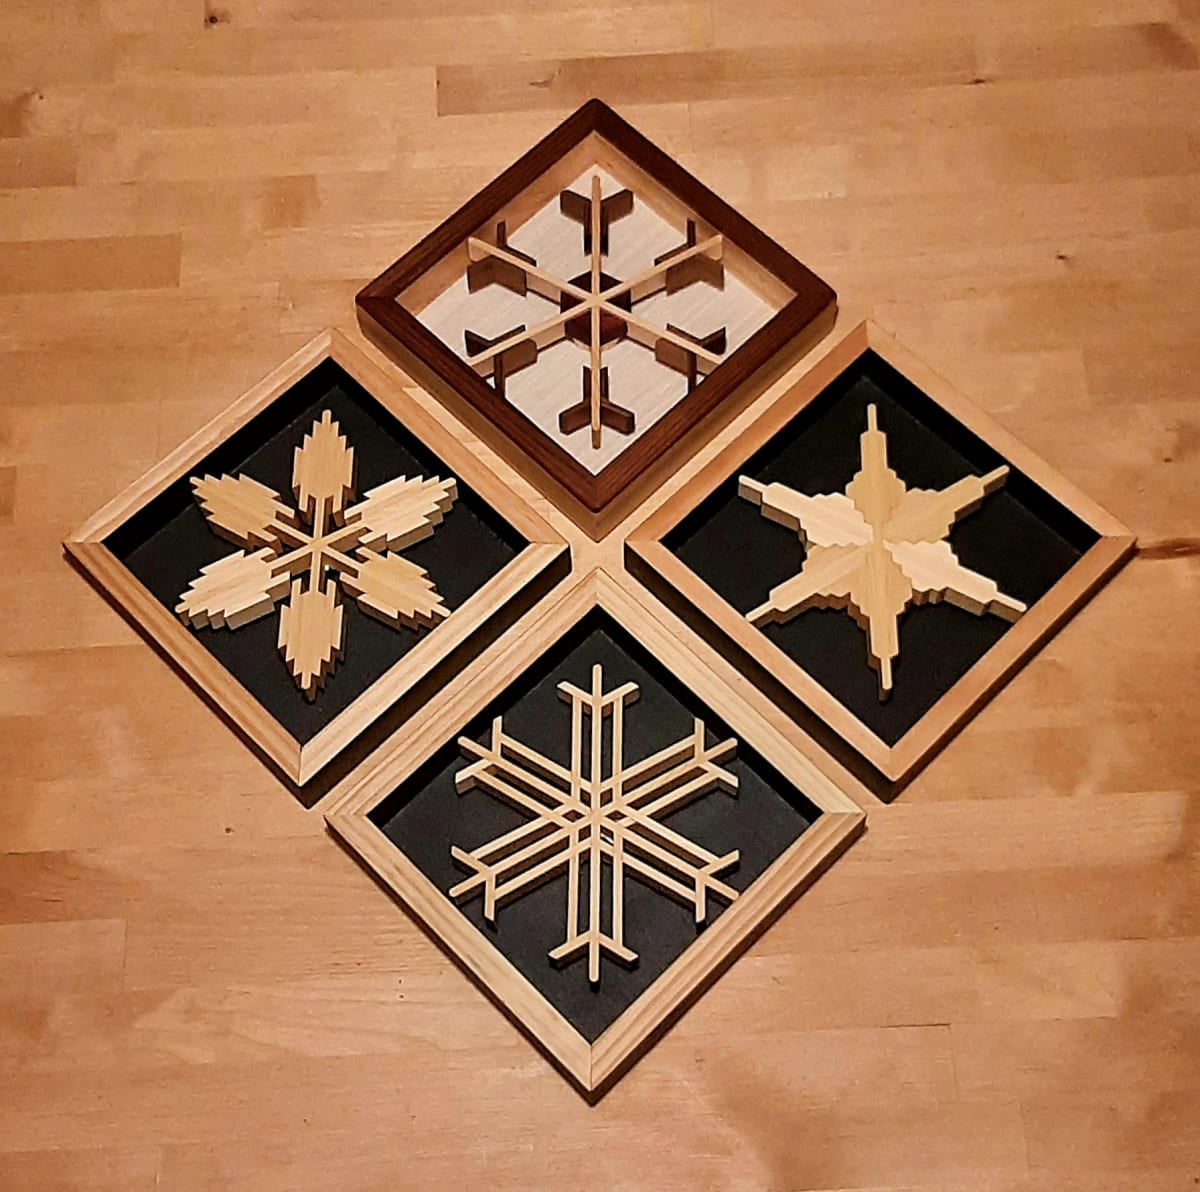 Individual 8"x8" Diamond Framed Snowflakes by Robert E LeBlanc  Image: Birch shadow frames, either flat black to highlight white snowflakes, or various options to highlight multi-coloured flakes.